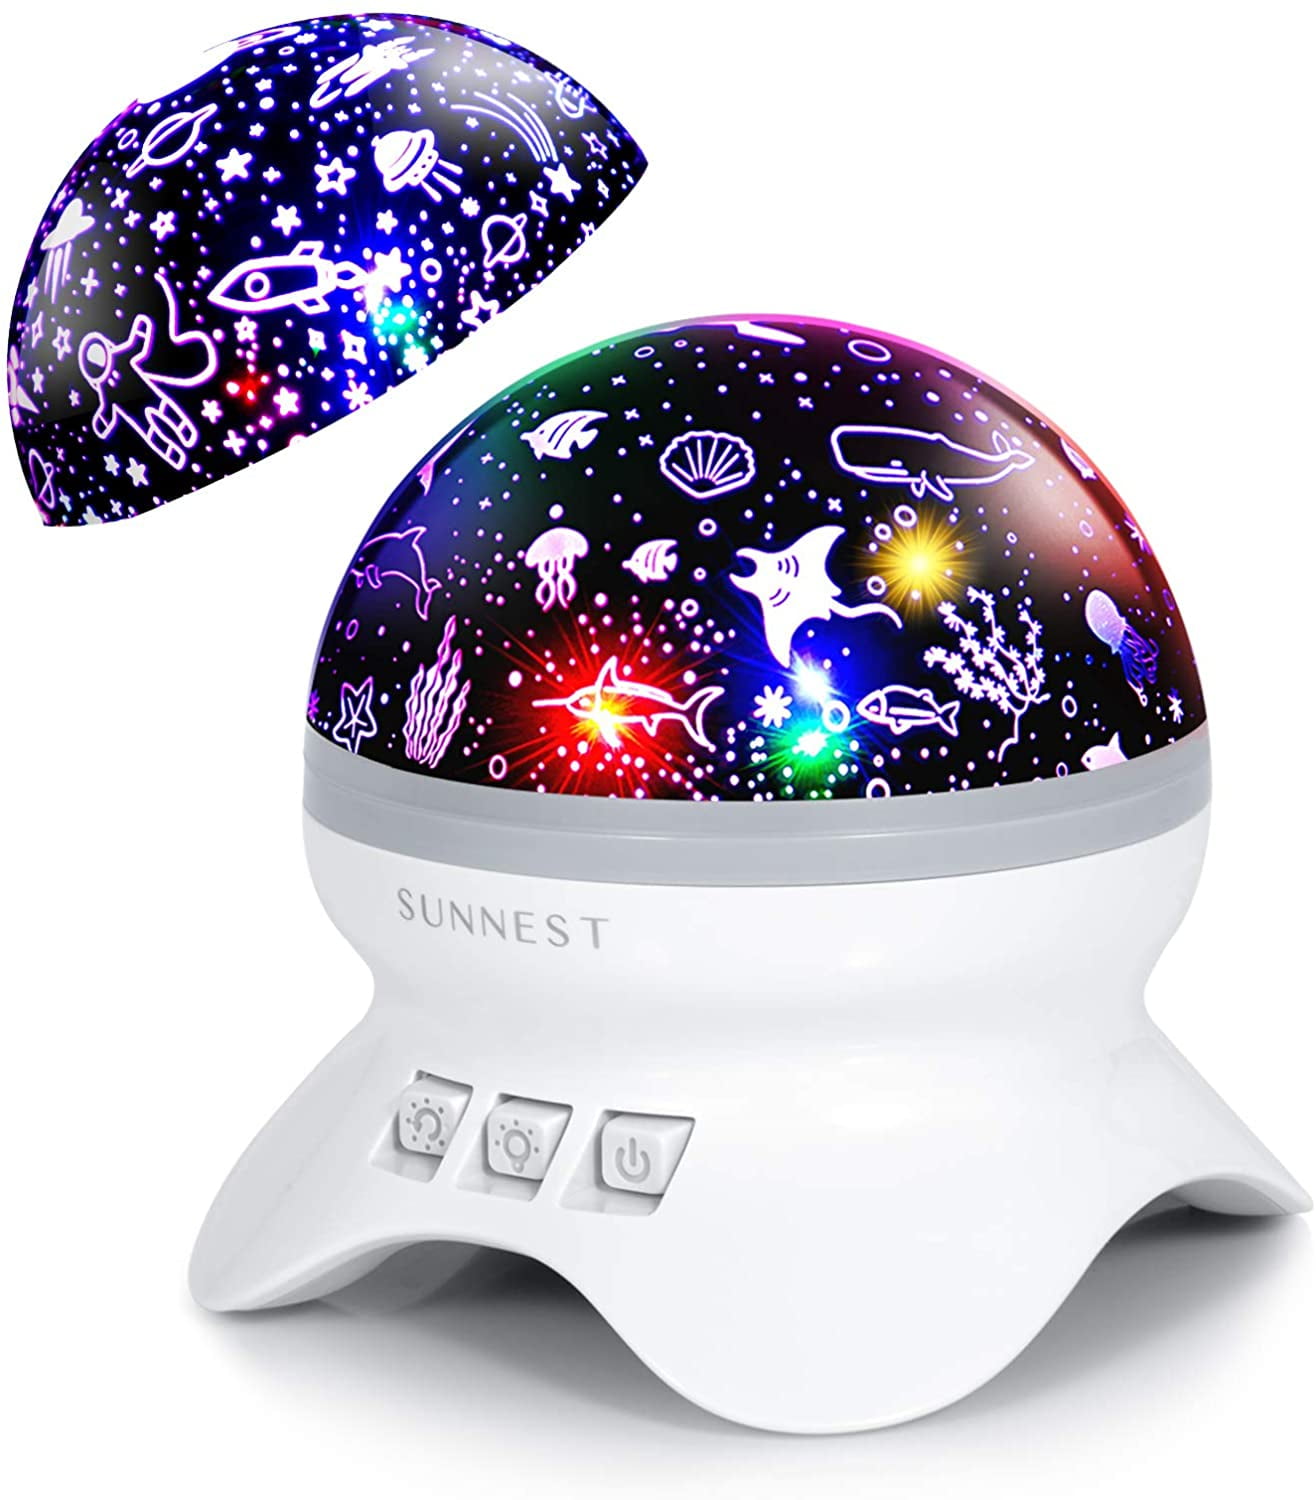 Redenaar Ironisch Verdampen Night Light for Kids, 2 in 1 Baby Night Light - Space and Ocean Themes  Projector 360 Degree Rotation Star Projector - 4 LED Bulbs 9 Light Color  Changing, Gifts for Children Bedroom Birthday Party - Walmart.com